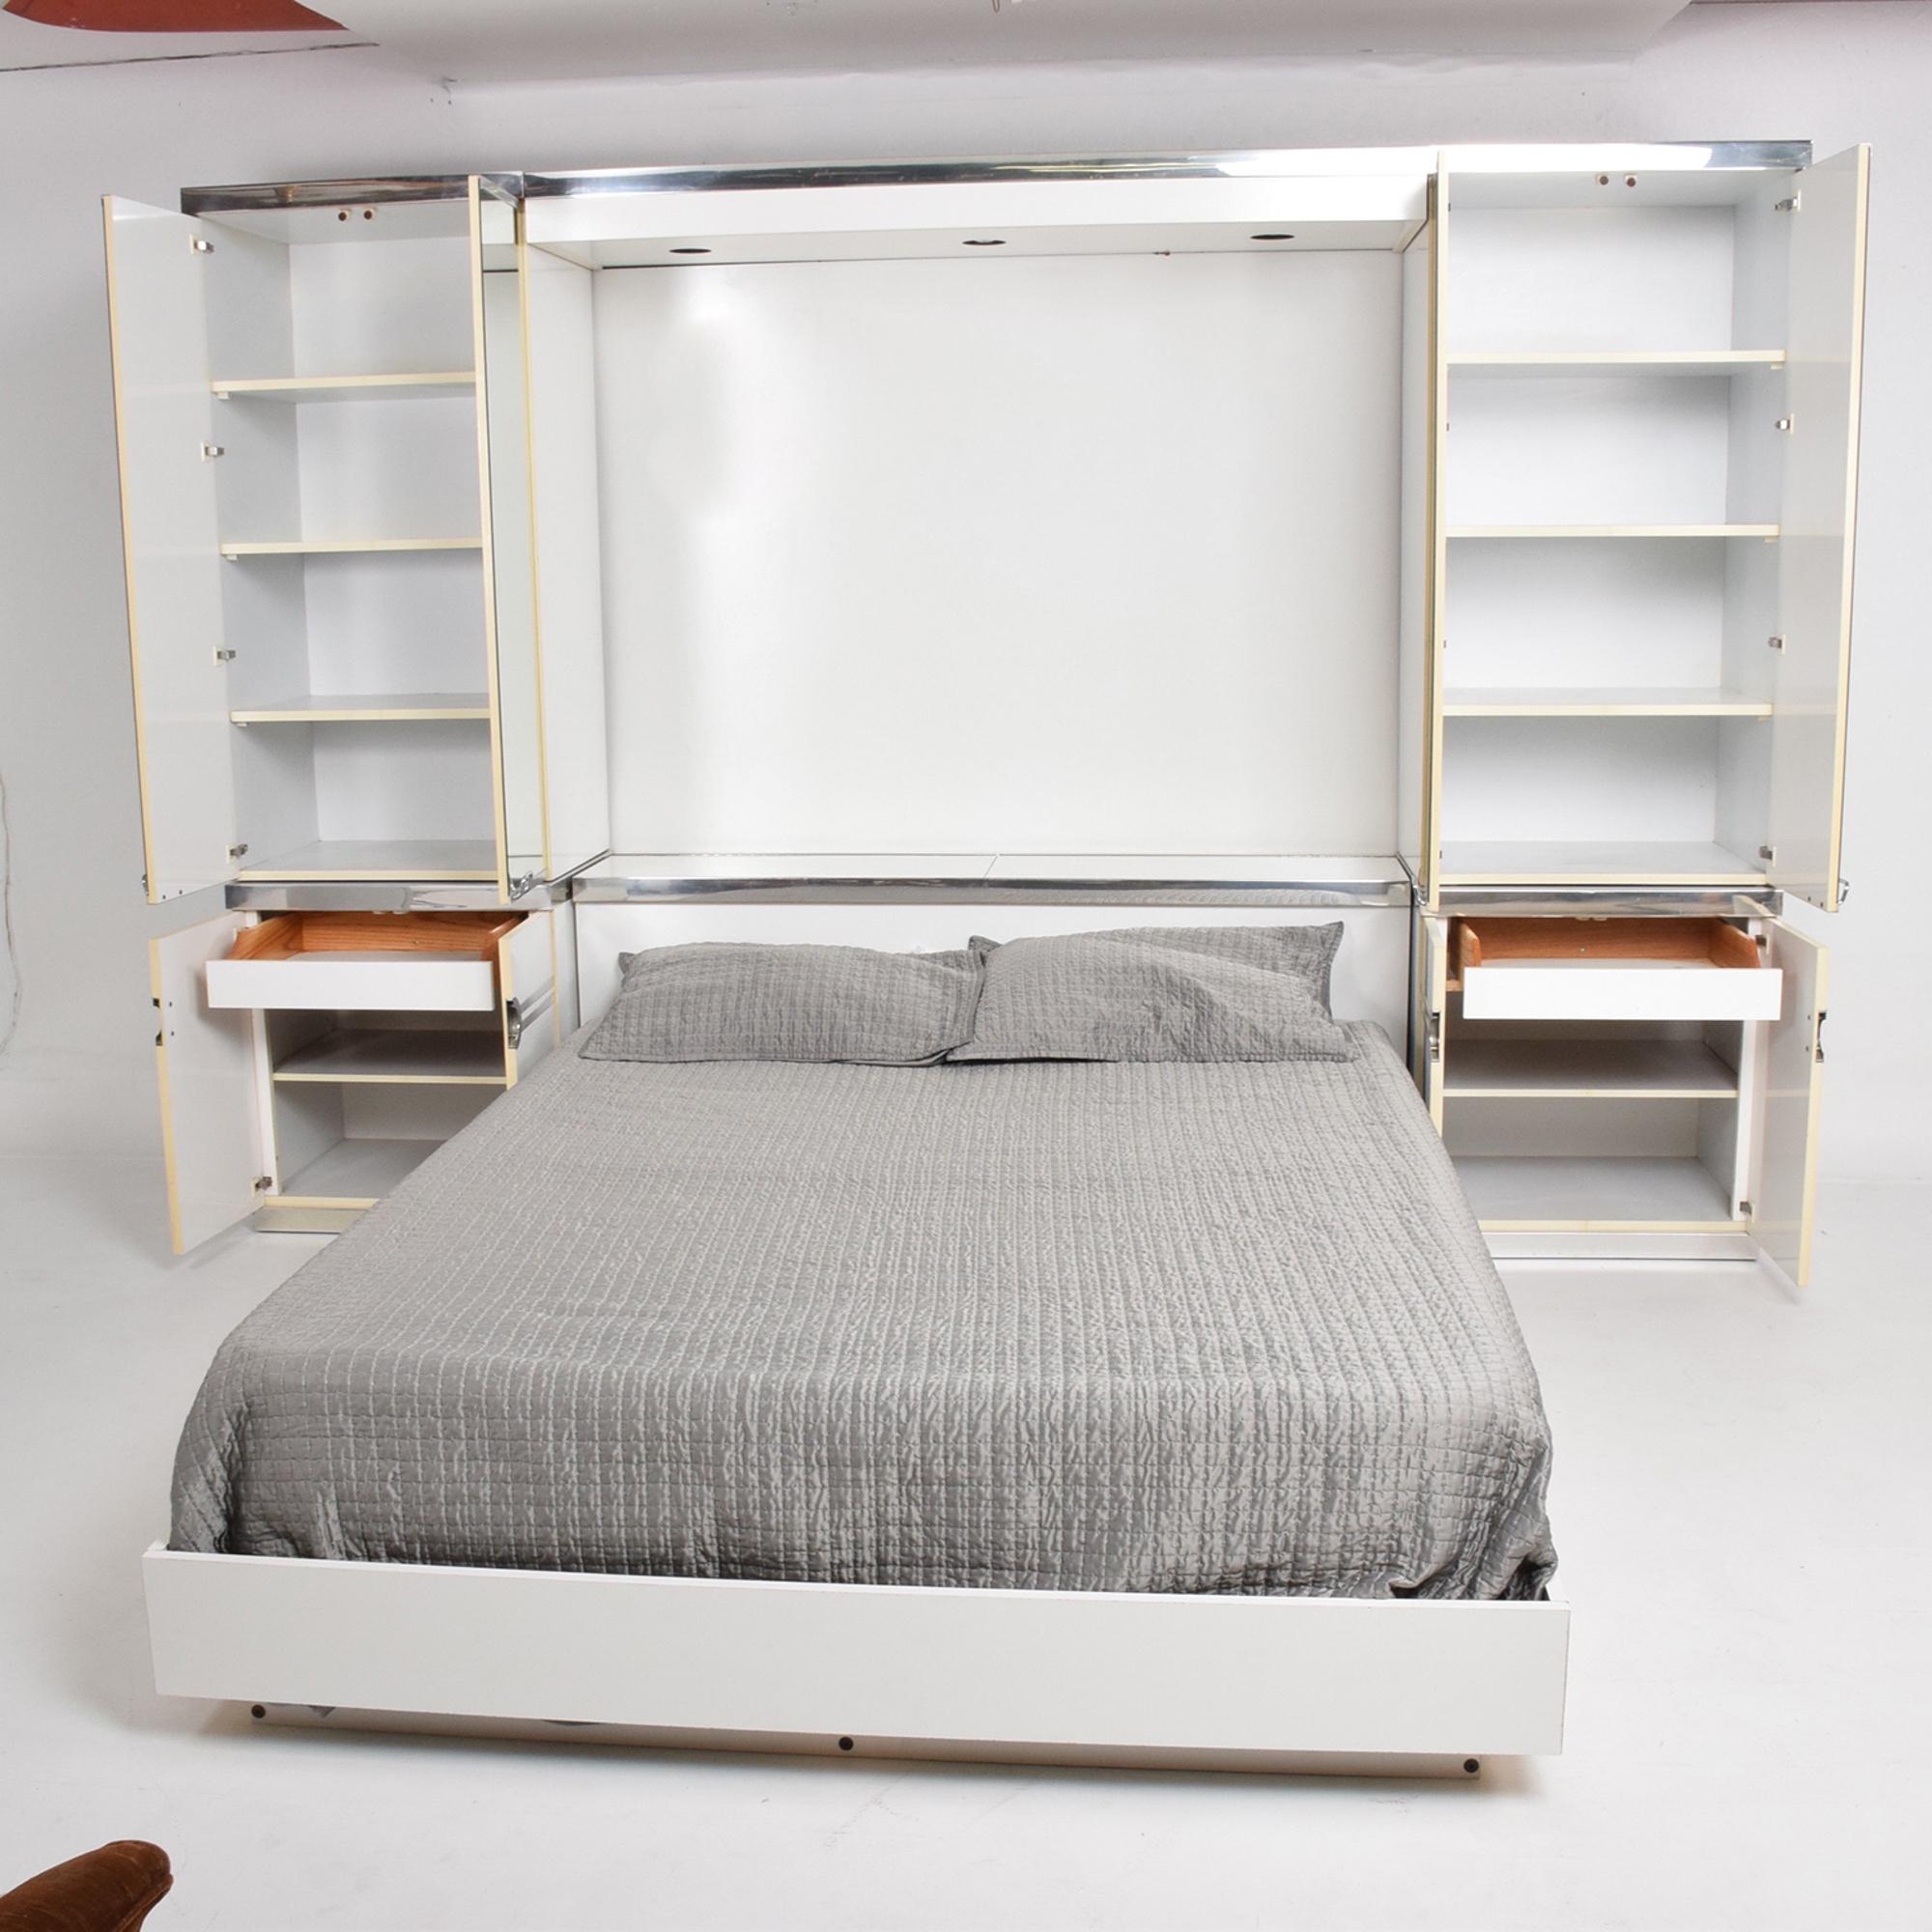 mirrored bedroom furniture sets